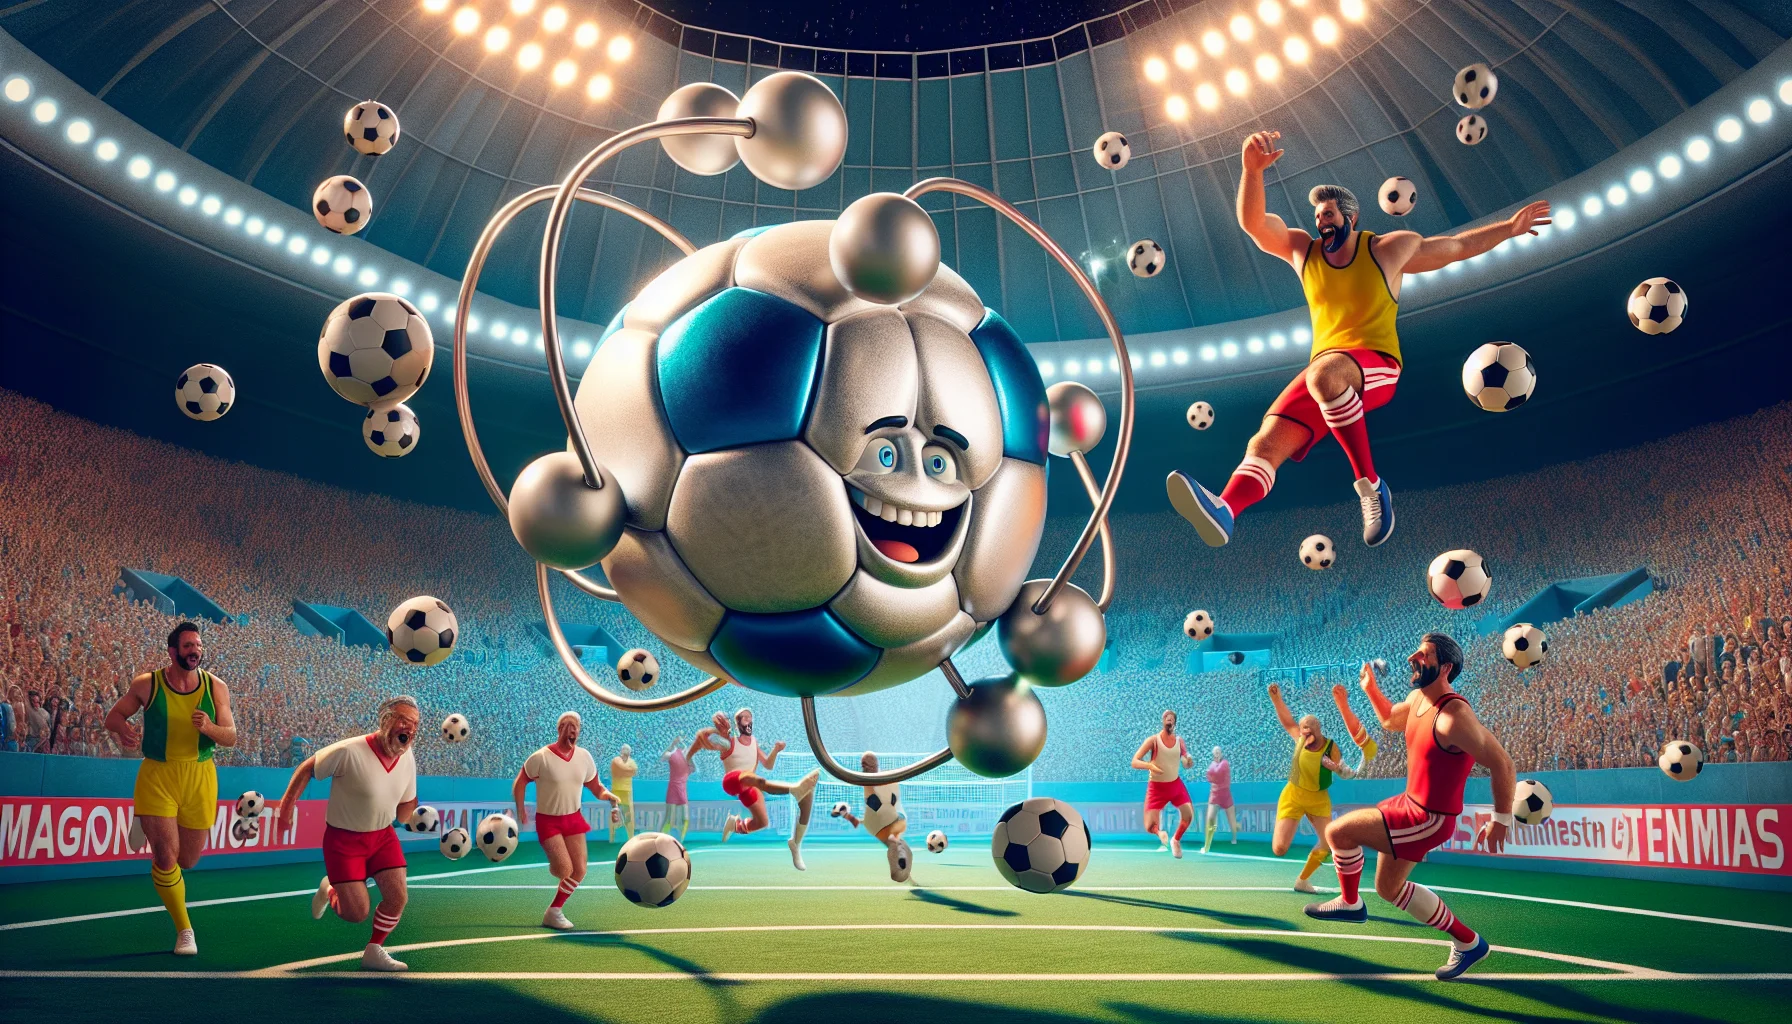 Visualize a humorous scenario involving a magnesium atom in a sporting context. The magnesium atom should be personified, full of energy and vitality, due to its two valence electrons depicted orbiting around it like energetic soccer balls. The scene is expanding the joke that these electrons are the 'extra boost' athletes get from magnesium supplements. To further entail the sports theme, maintain a background of a vibrant sports arena filled with other atomic spectators, cheering and laughing at the playful antics of the magnesium atom.